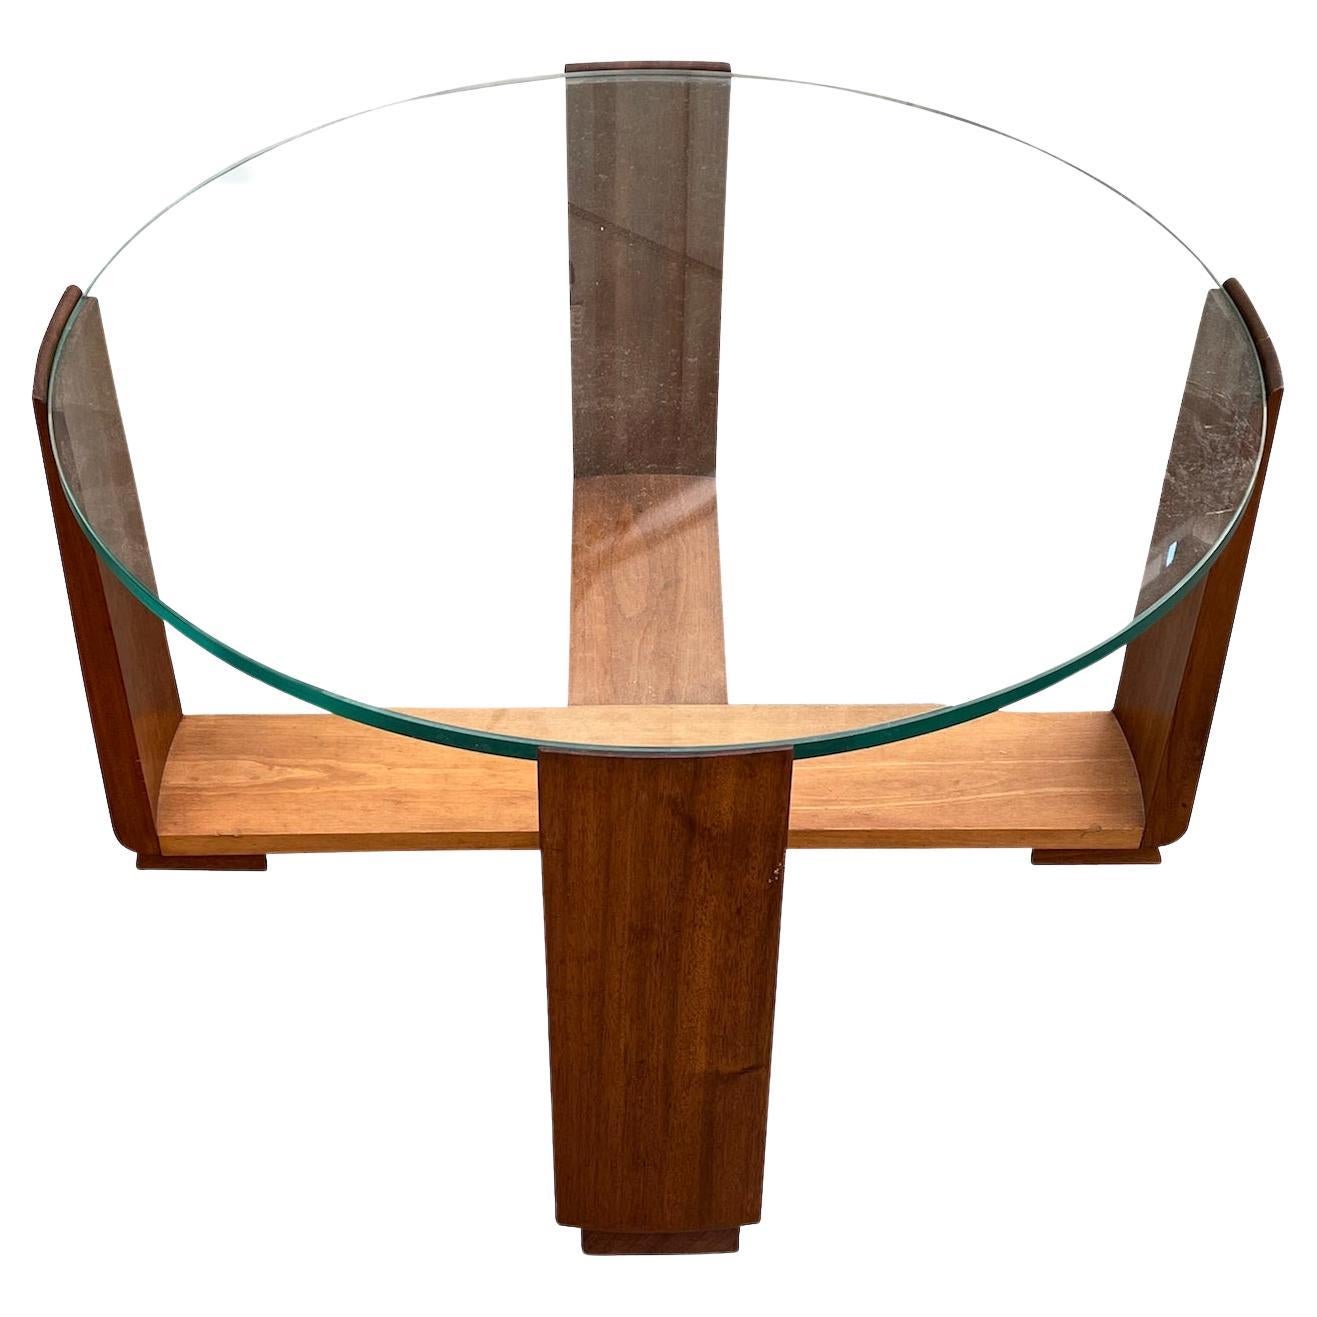 Round Glass Top, Wood Base Coffee Table, France, Mid Century